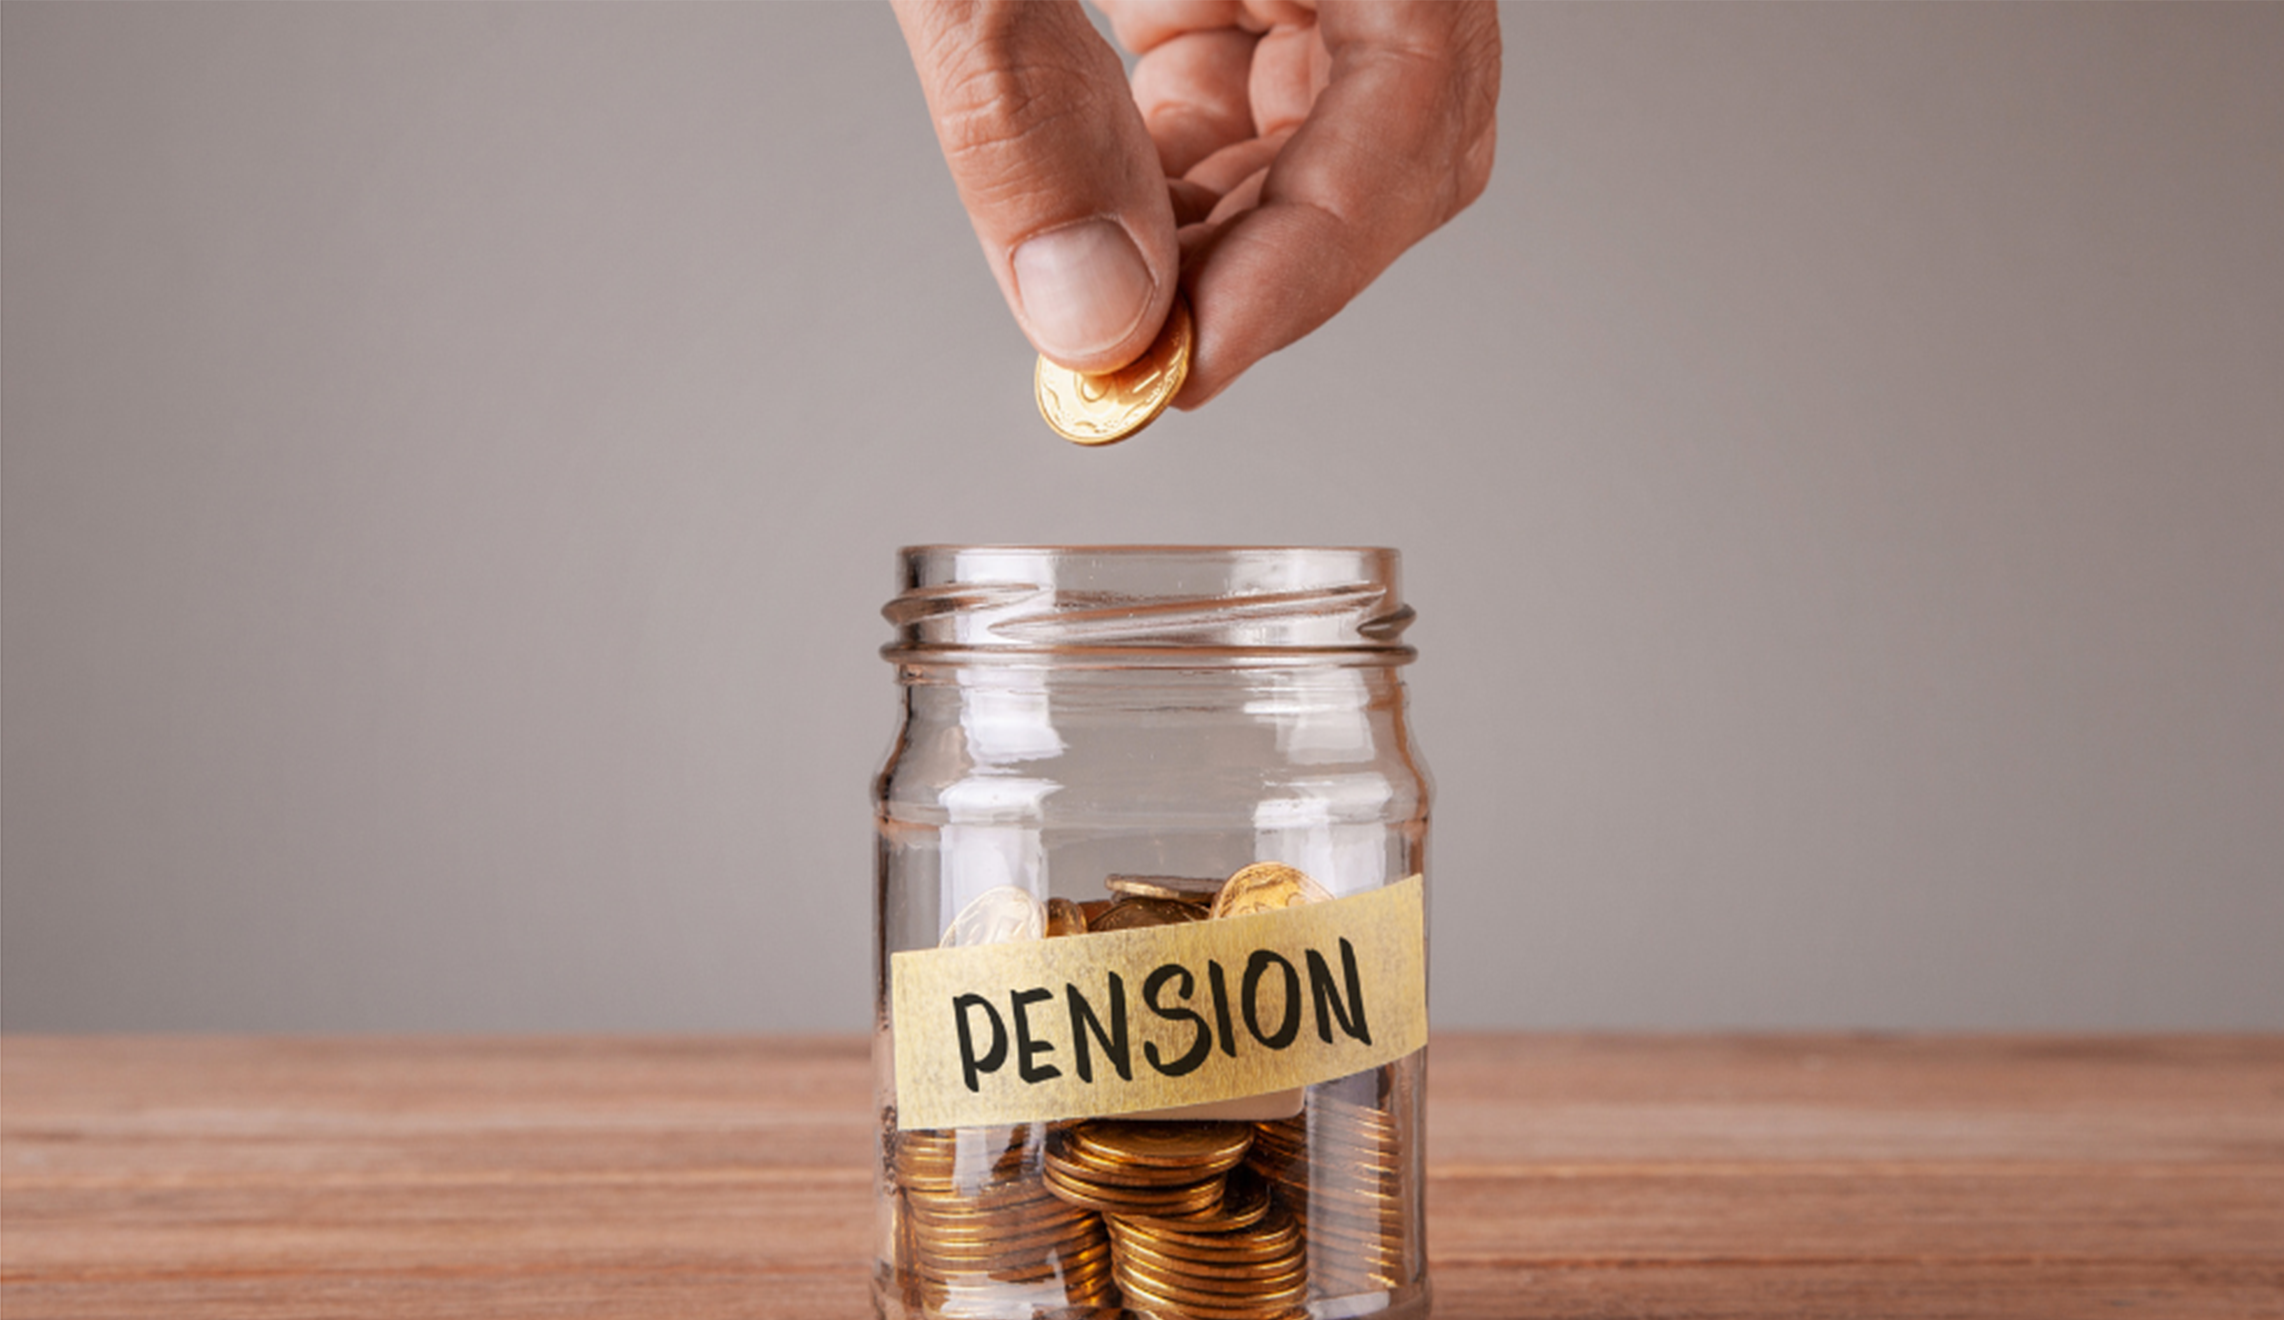 Auto-enrolment has helped workers save £114 billion into pensions Banner Photo